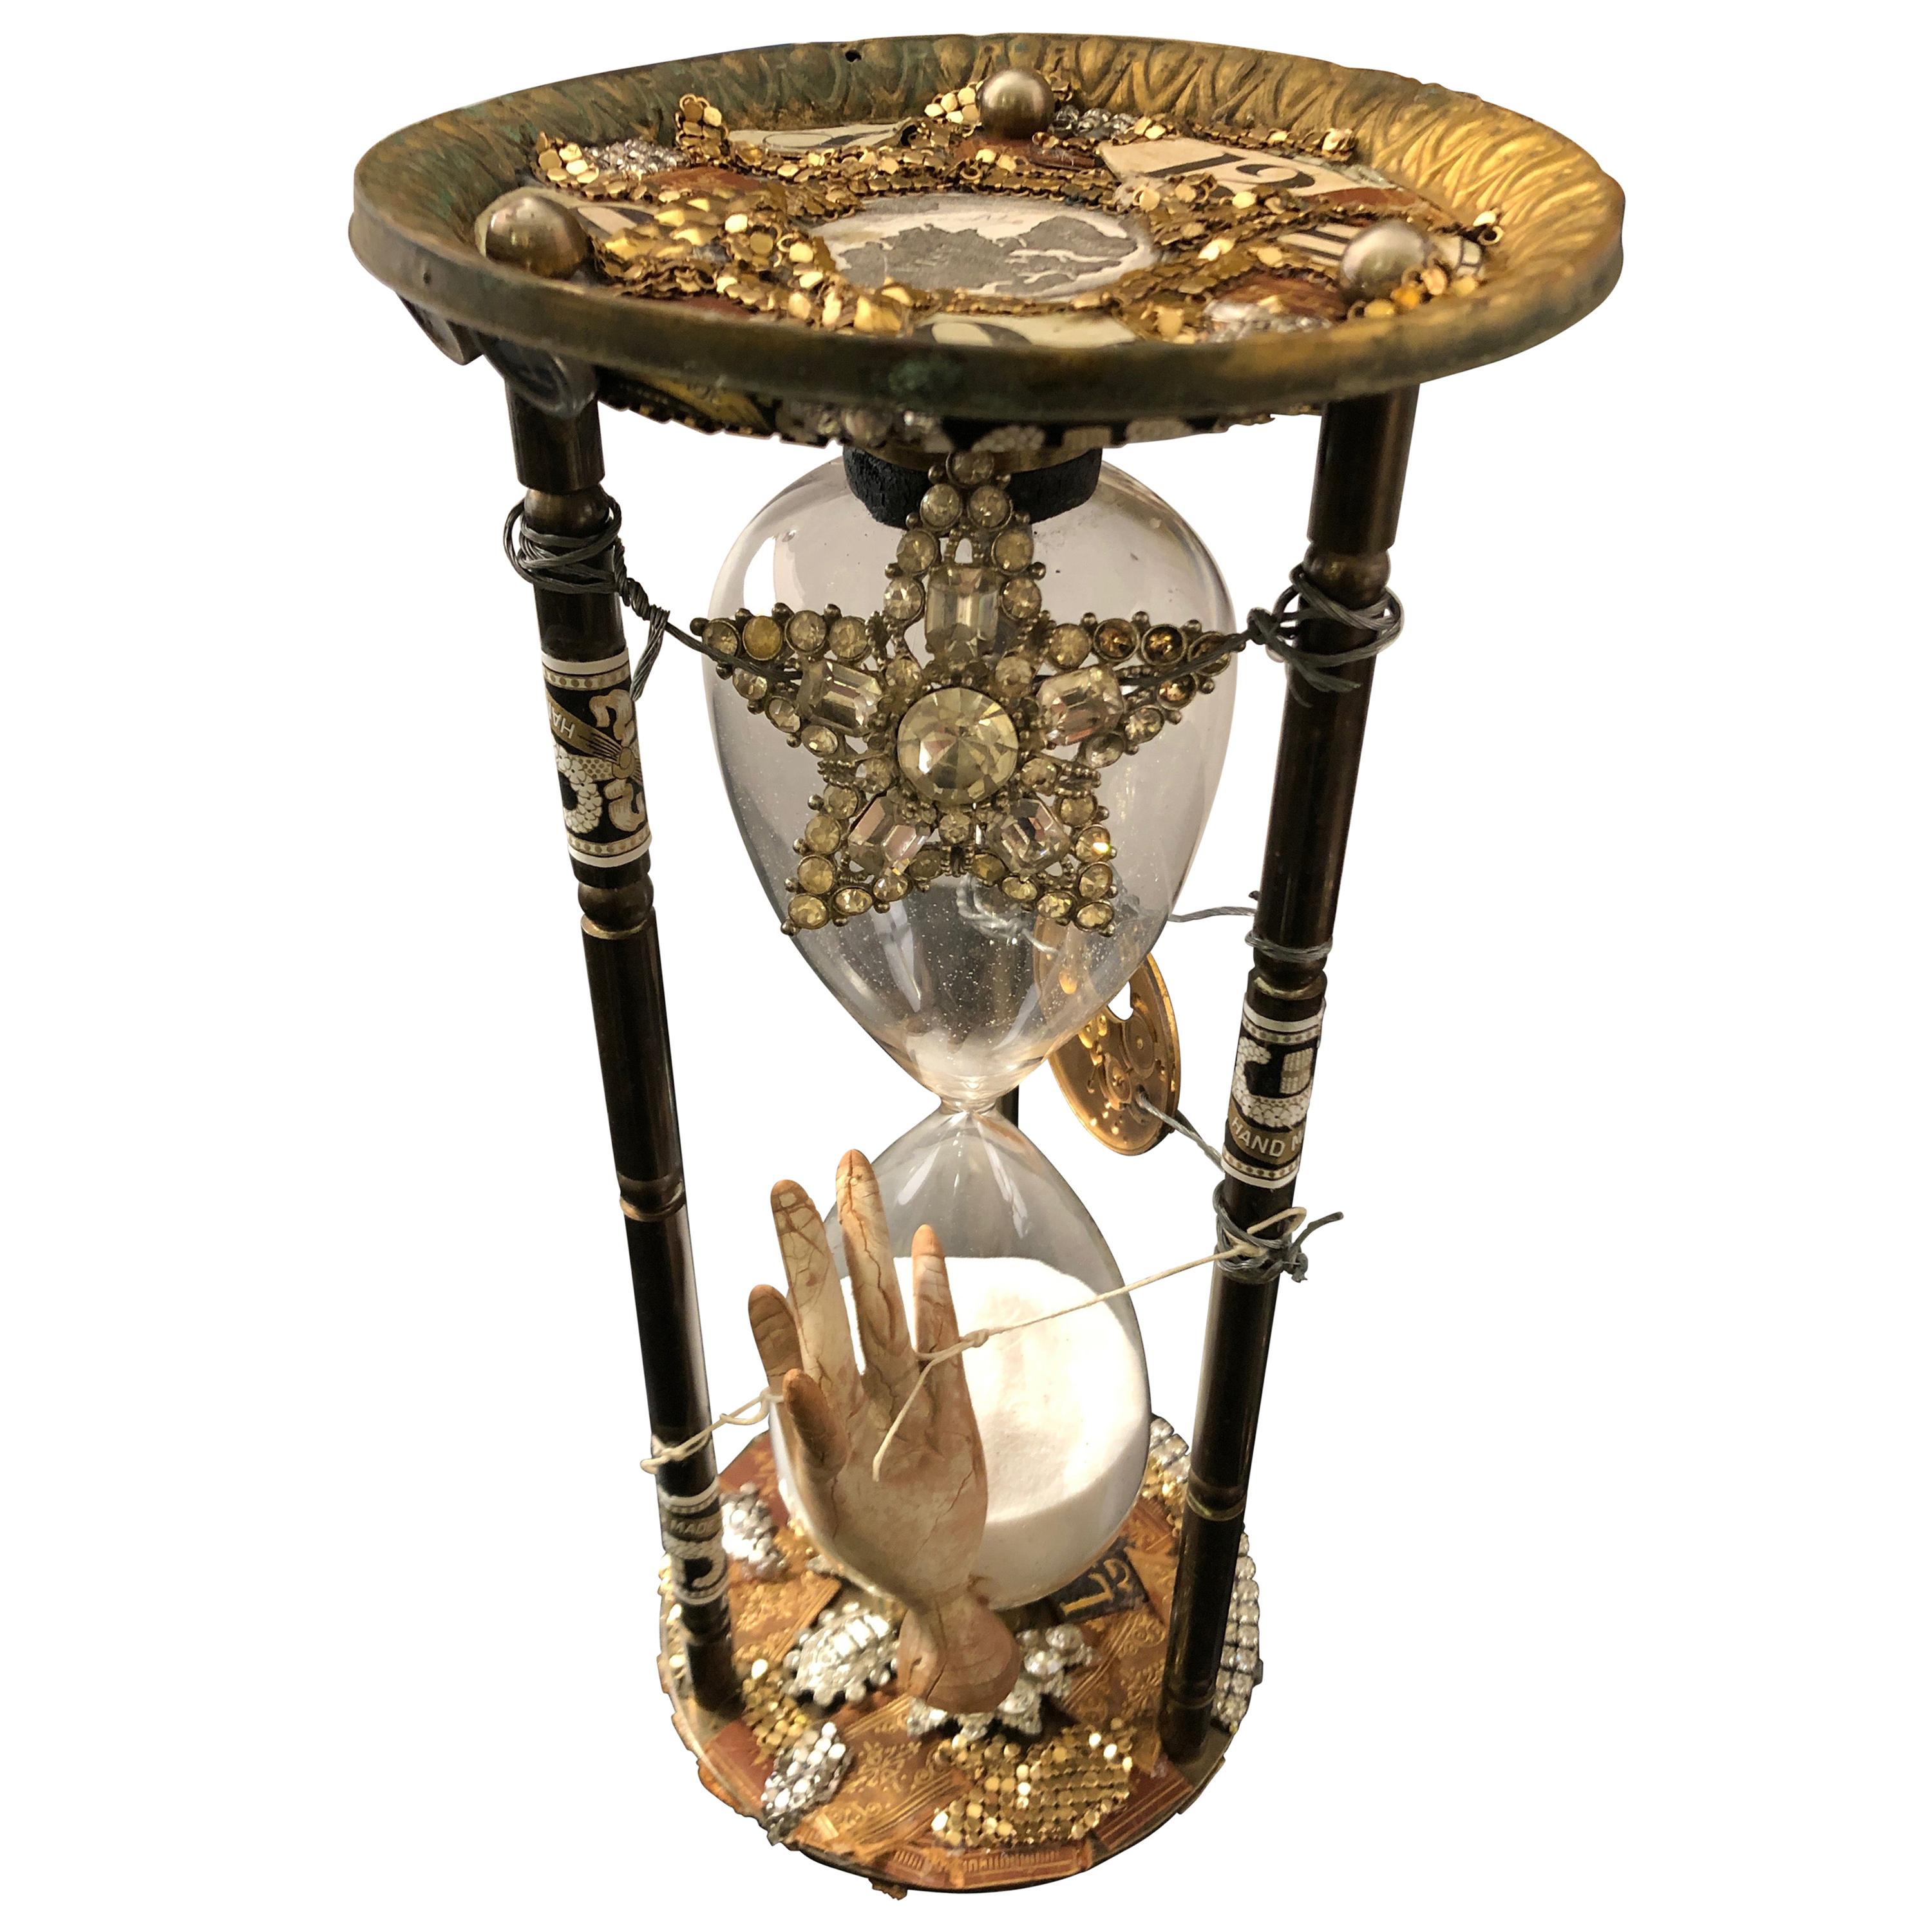 Extraordinary Hourglass Sculpture with Meticulous Artistry